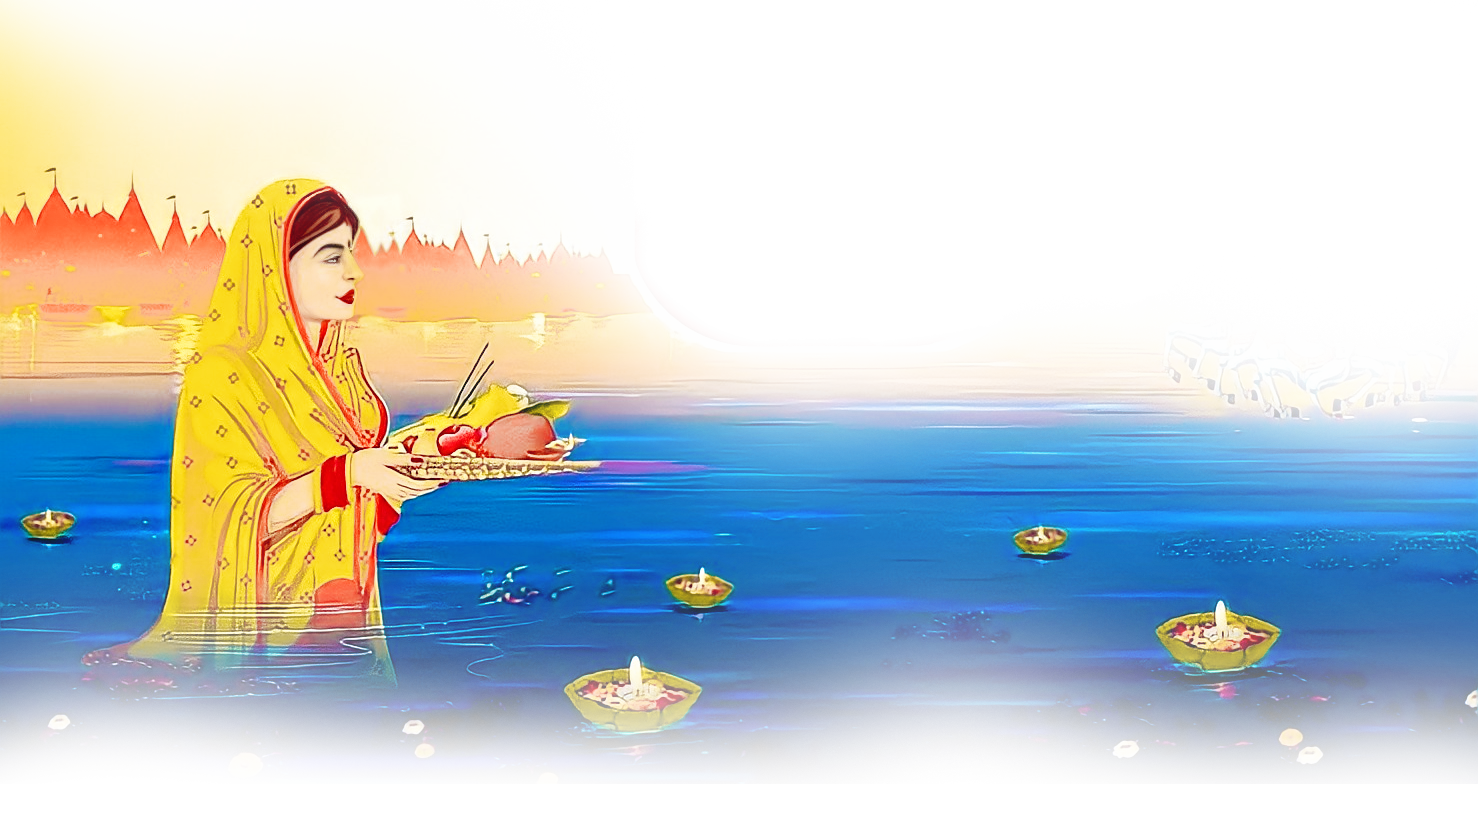 Chhath Puja Background PNG - FREE Vector Design - Cdr, Ai, EPS, PNG, SVG